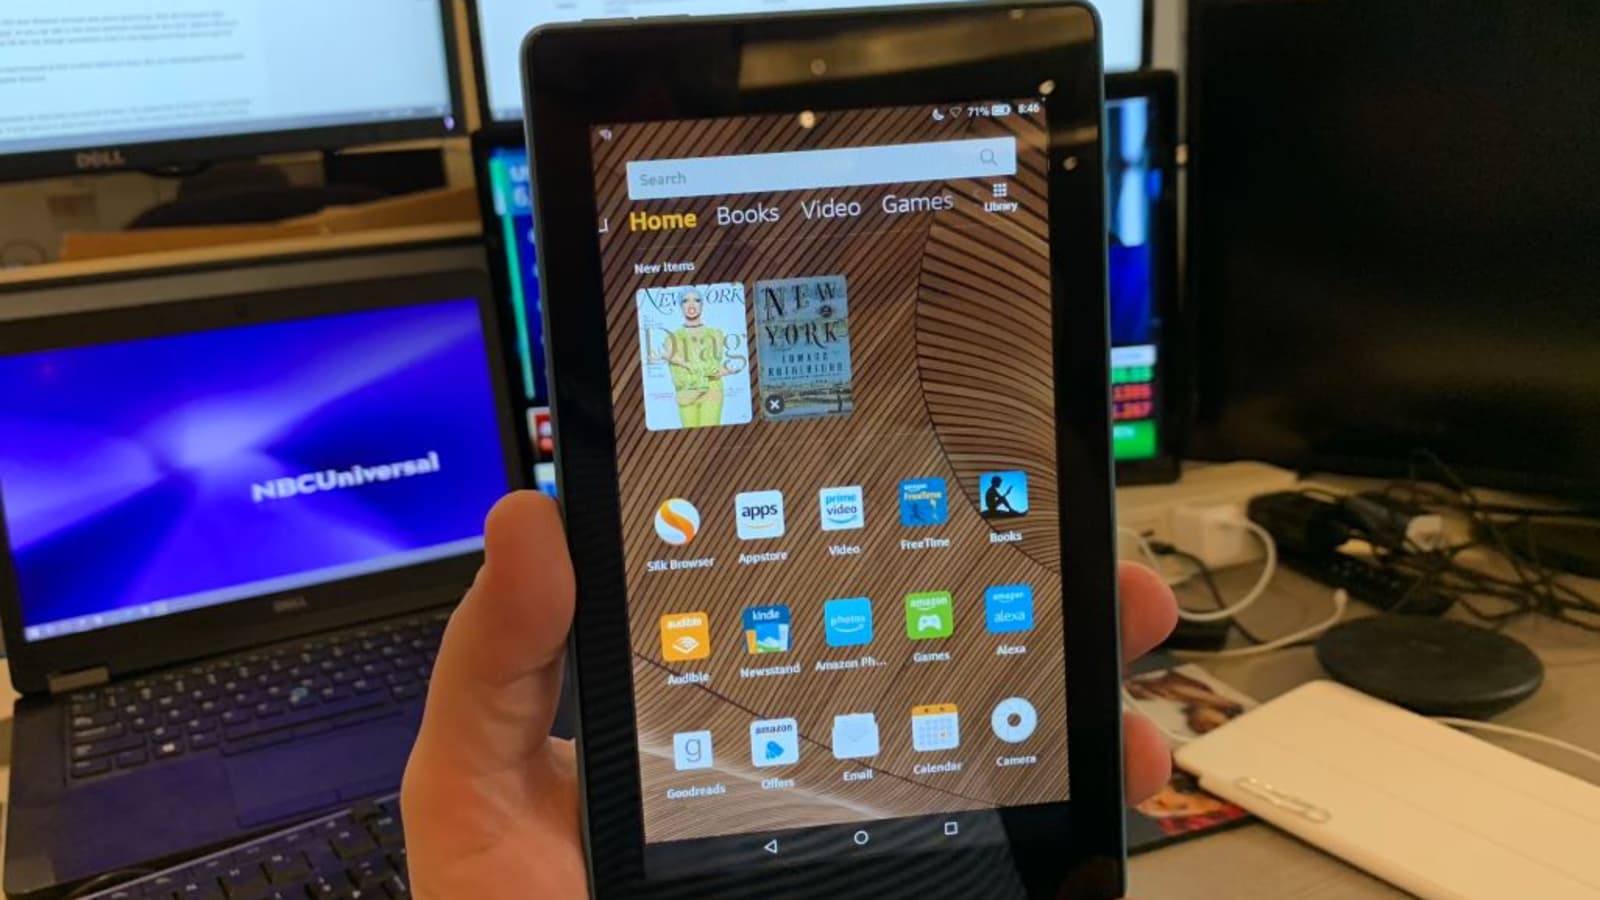 Amazon Fire 7 2019 Tablet Review Skip It Buy Fire Hd8 Instead - how to play roblox offline on amazon tablet